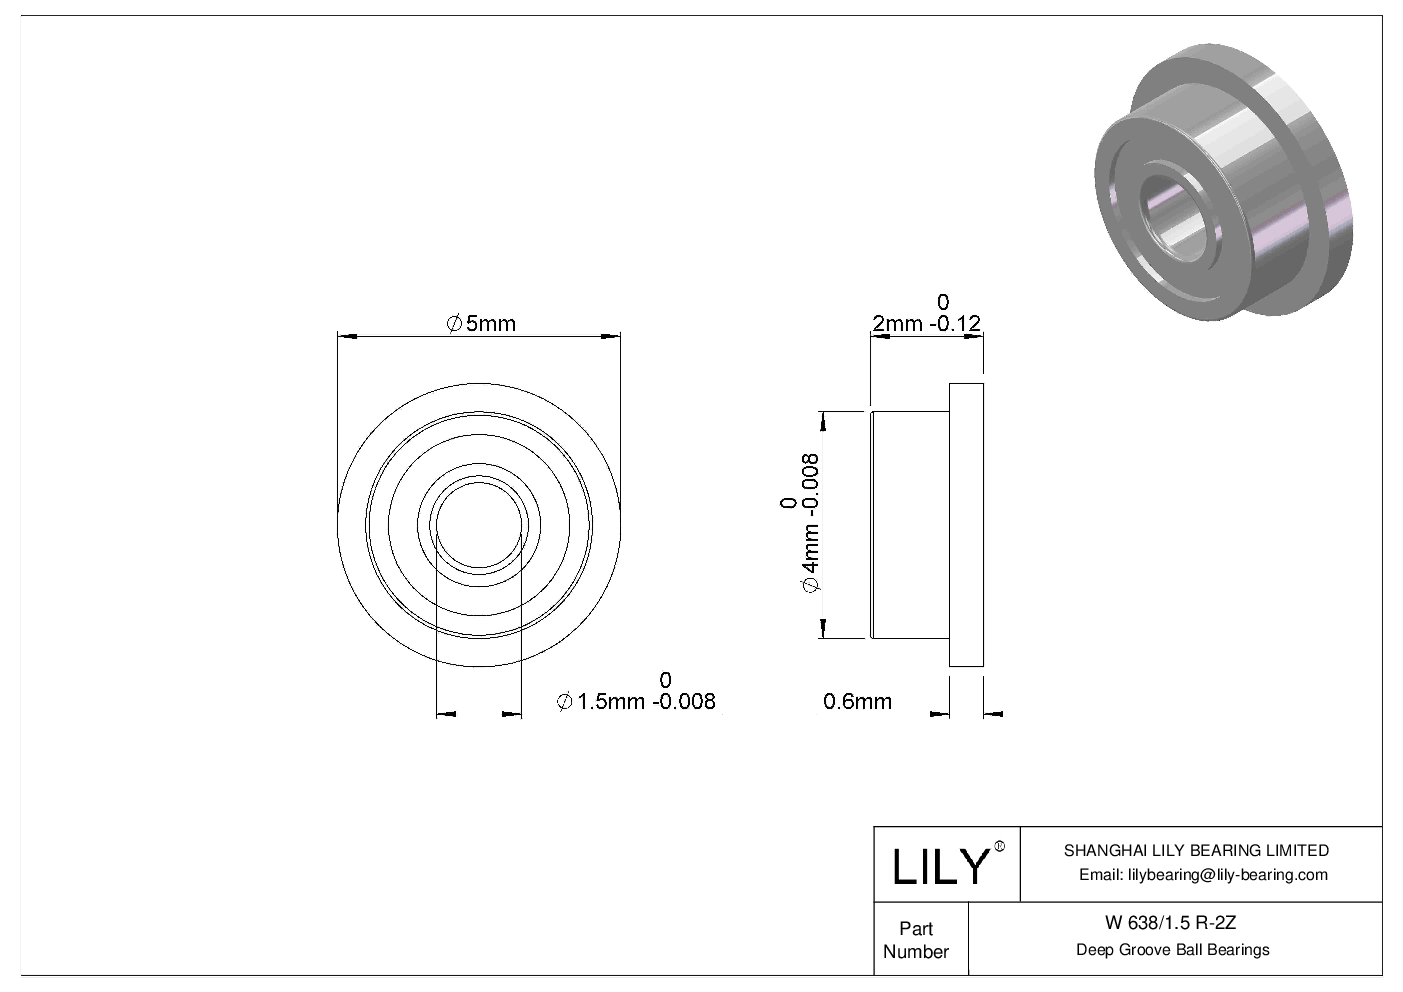 W 638/1.5 R-2Z Flanged Ball Bearings cad drawing